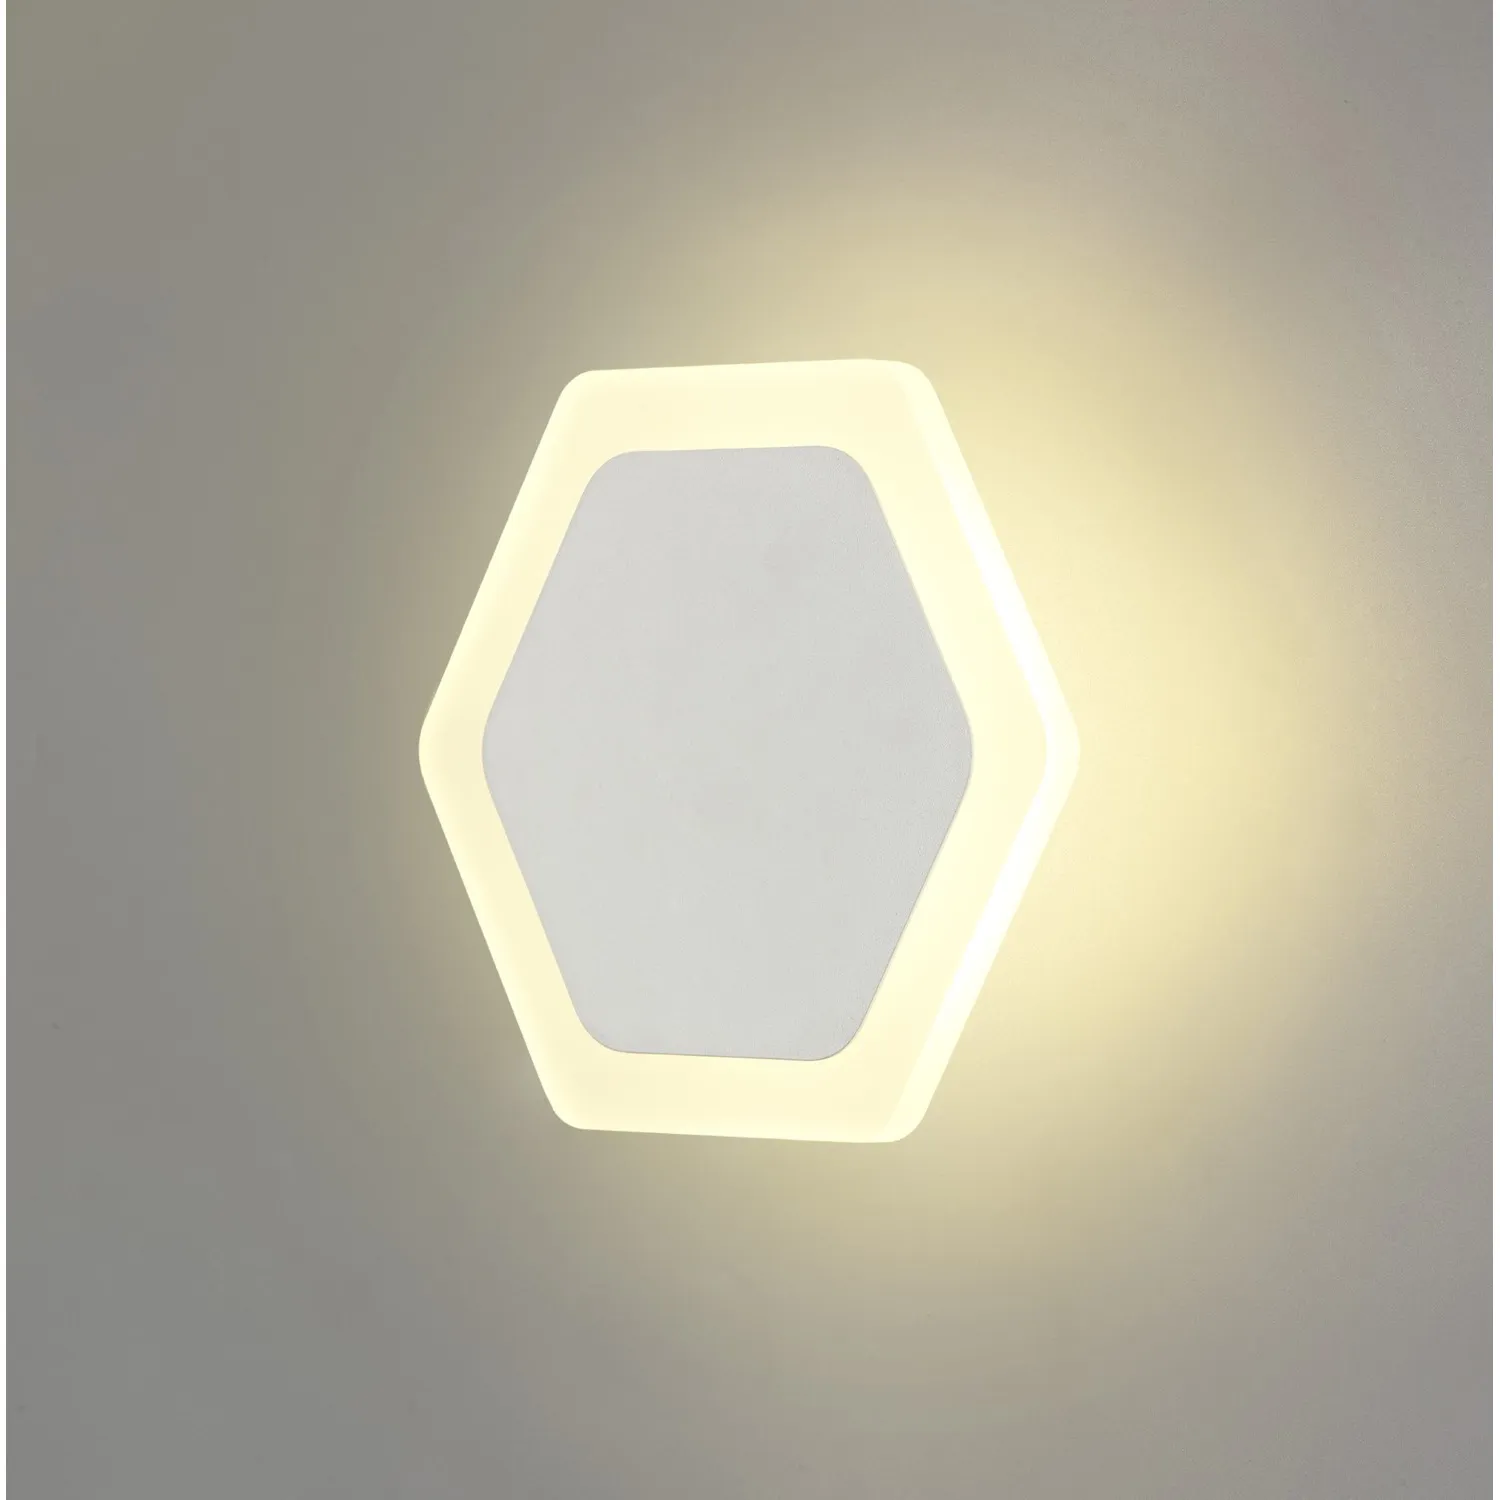 Edgware Magnetic Base Wall Lamp, 12W LED 3000K 498lm, 15 19cm Horizontal Hexagonal Centre, Sand White Acrylic Frosted Diffuser